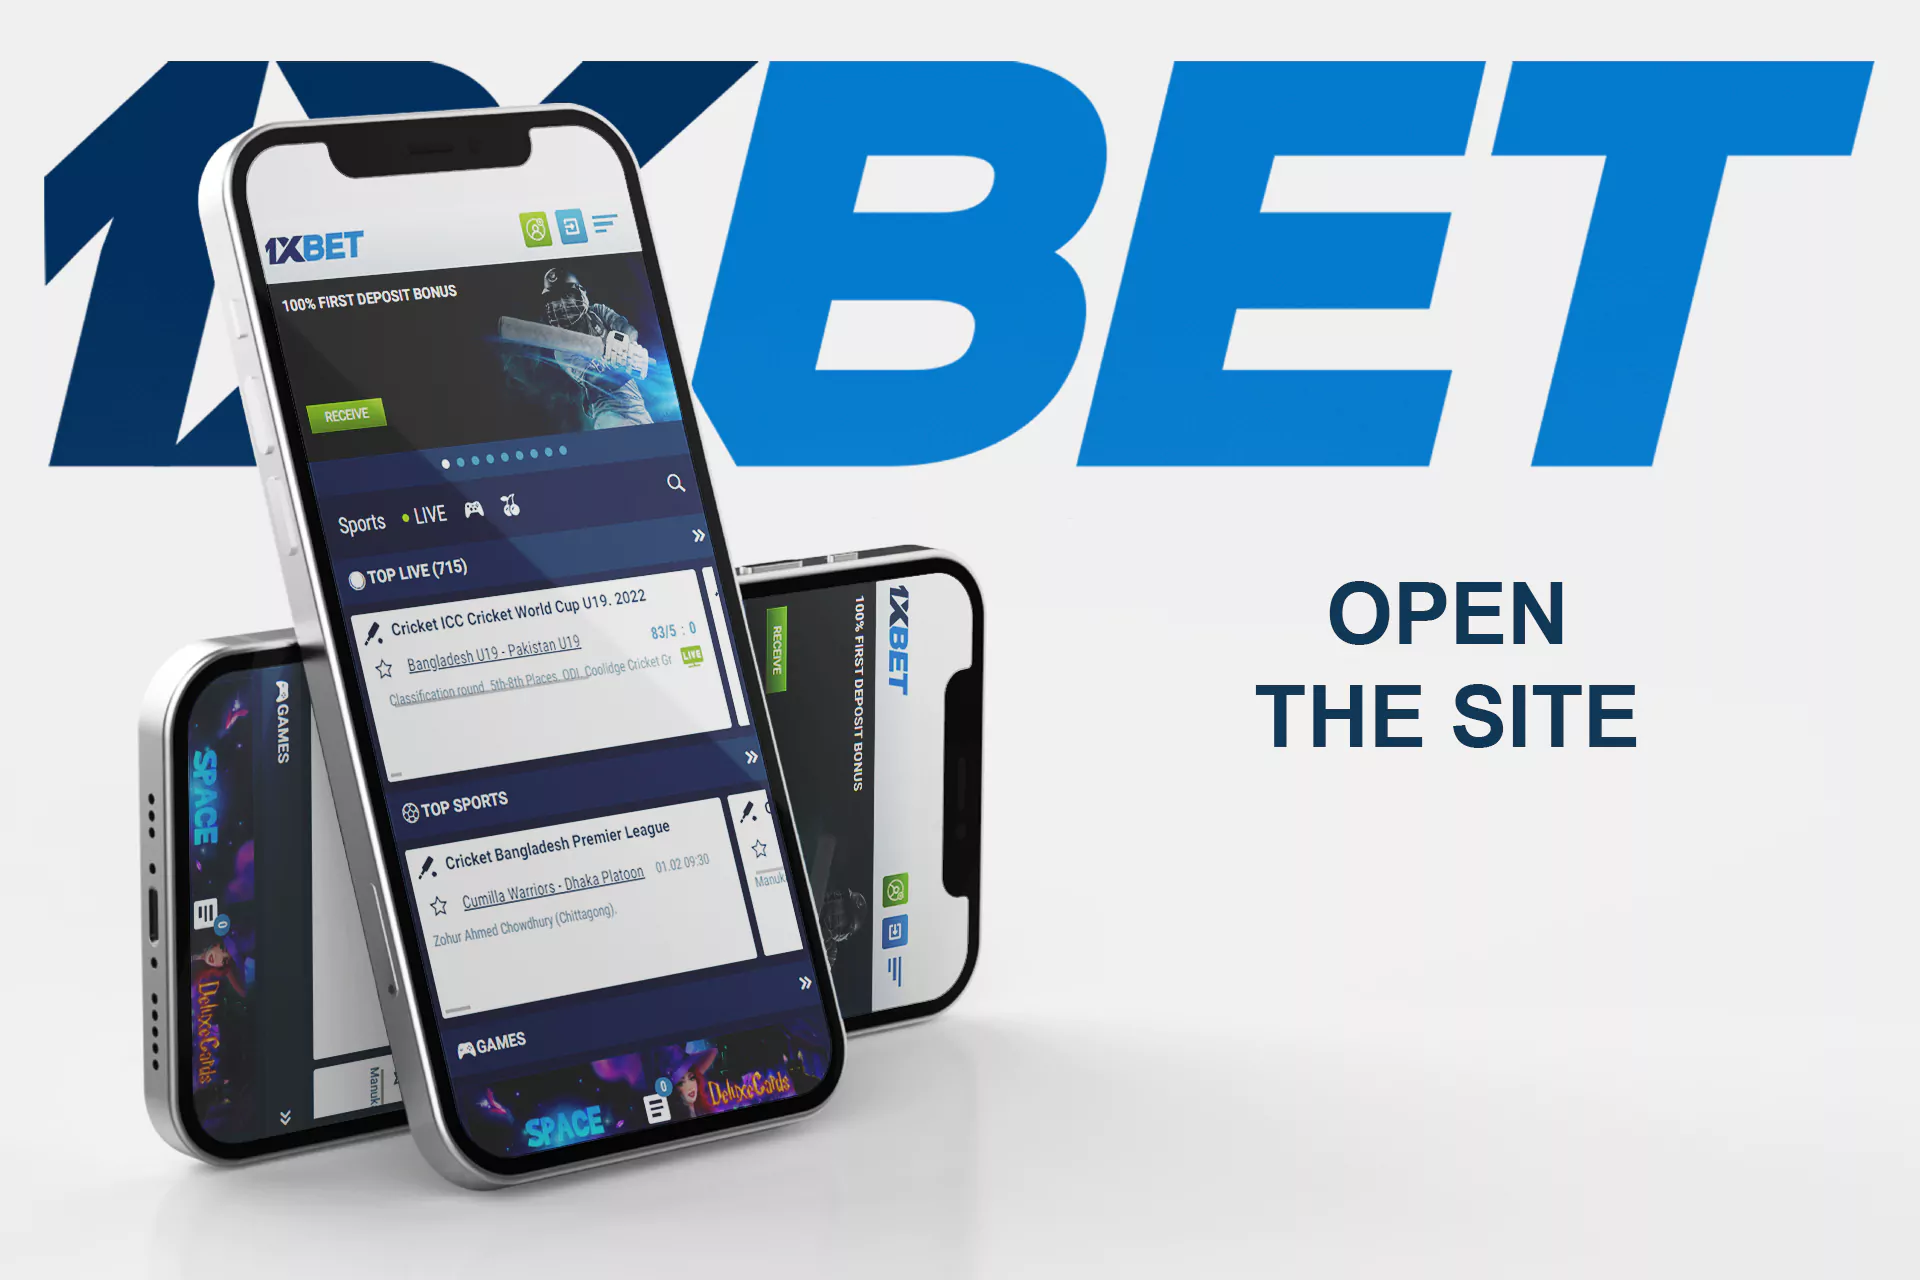 Open a browser on your device and go to the official website of 1xBet.